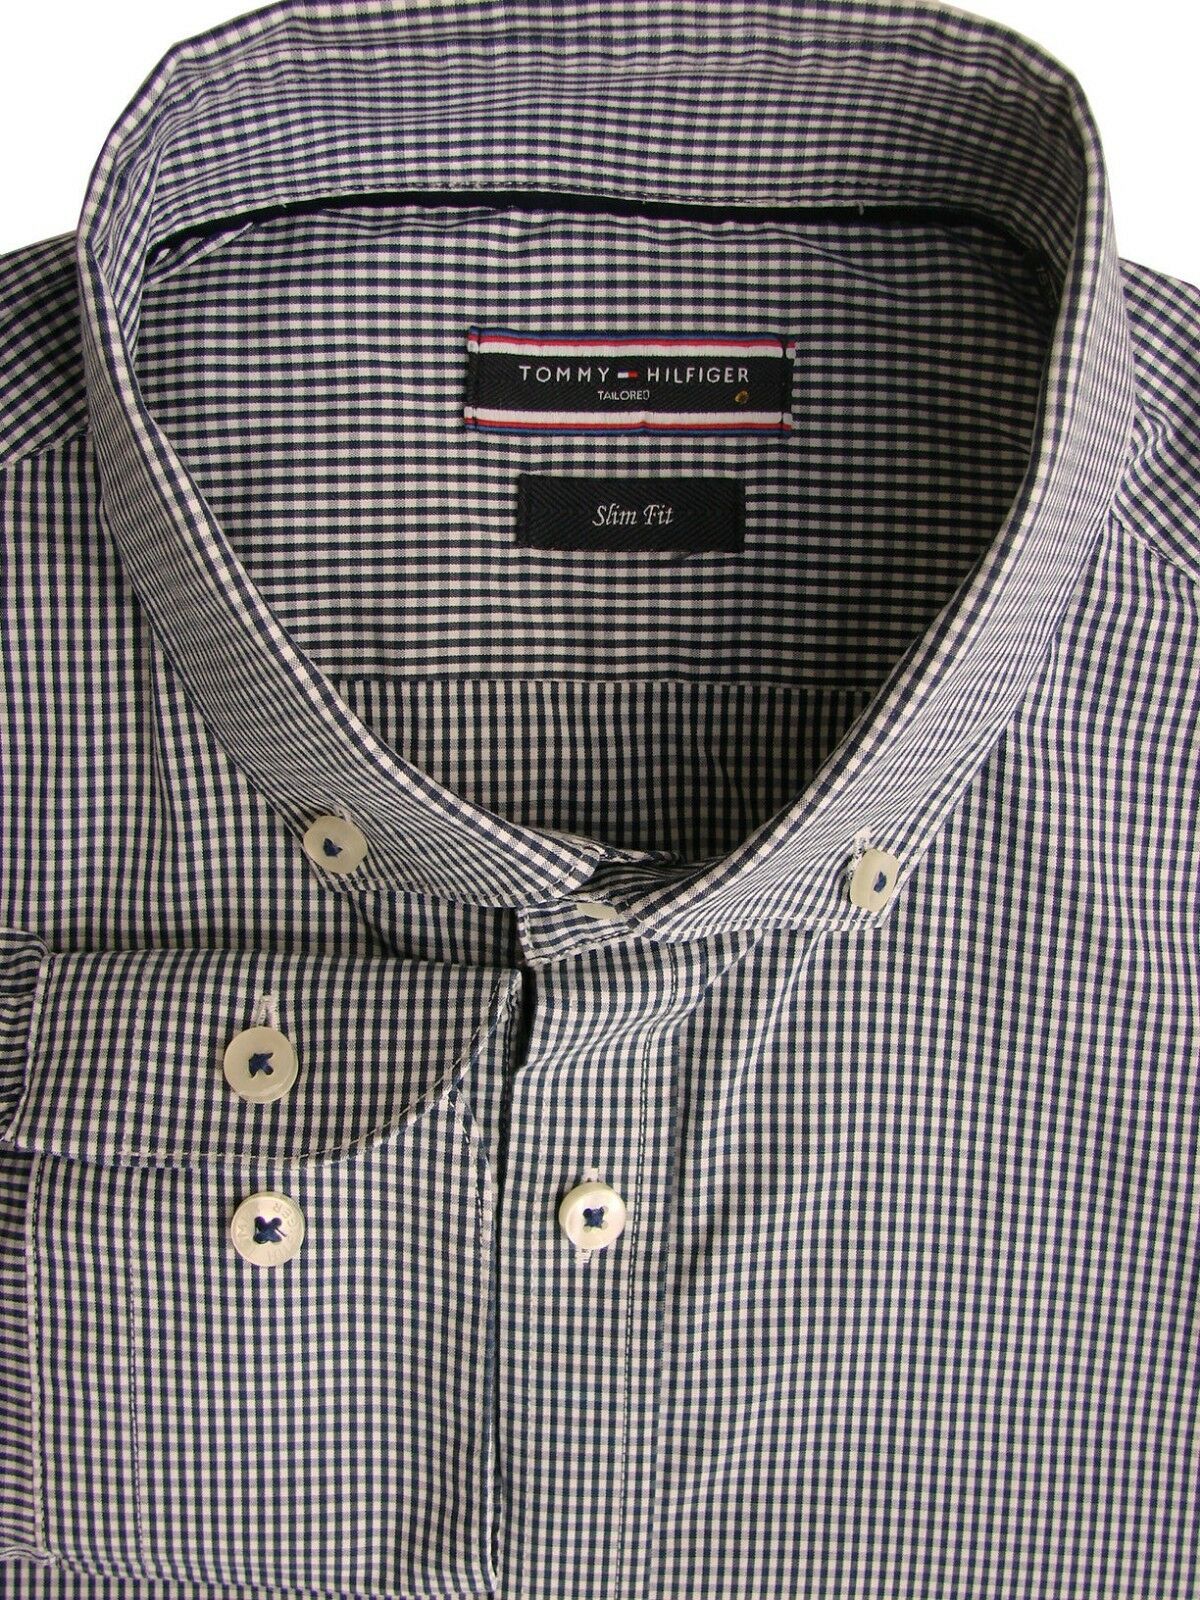 TOMMY HILFIGER TAILORED Shirt Mens 15.5 M Dark Blue White Check FIT -